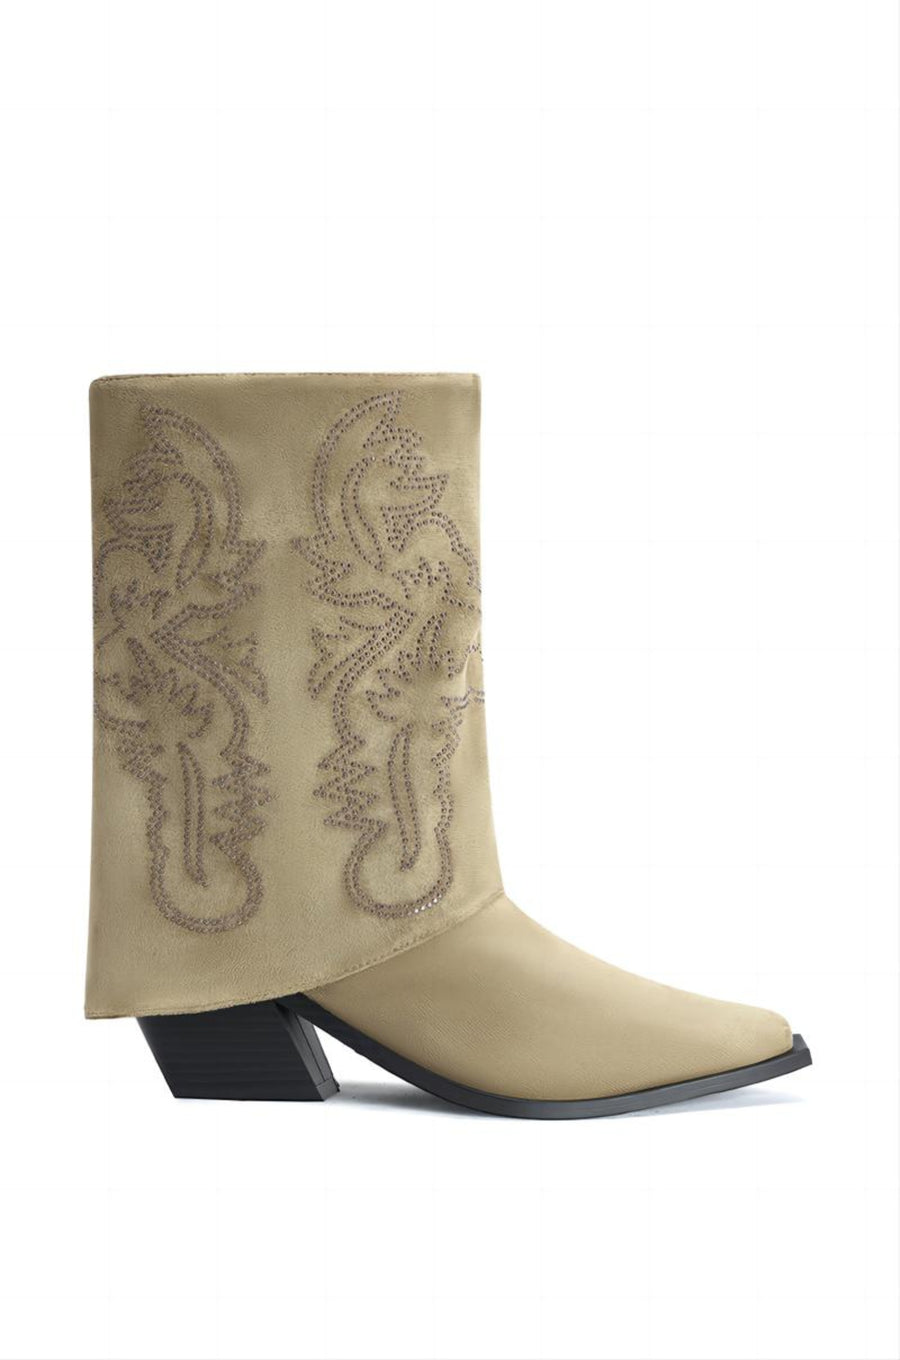 beige suede western inspired cowboy boots with a fold over accent and a classic cowboy boot design on the shaft 